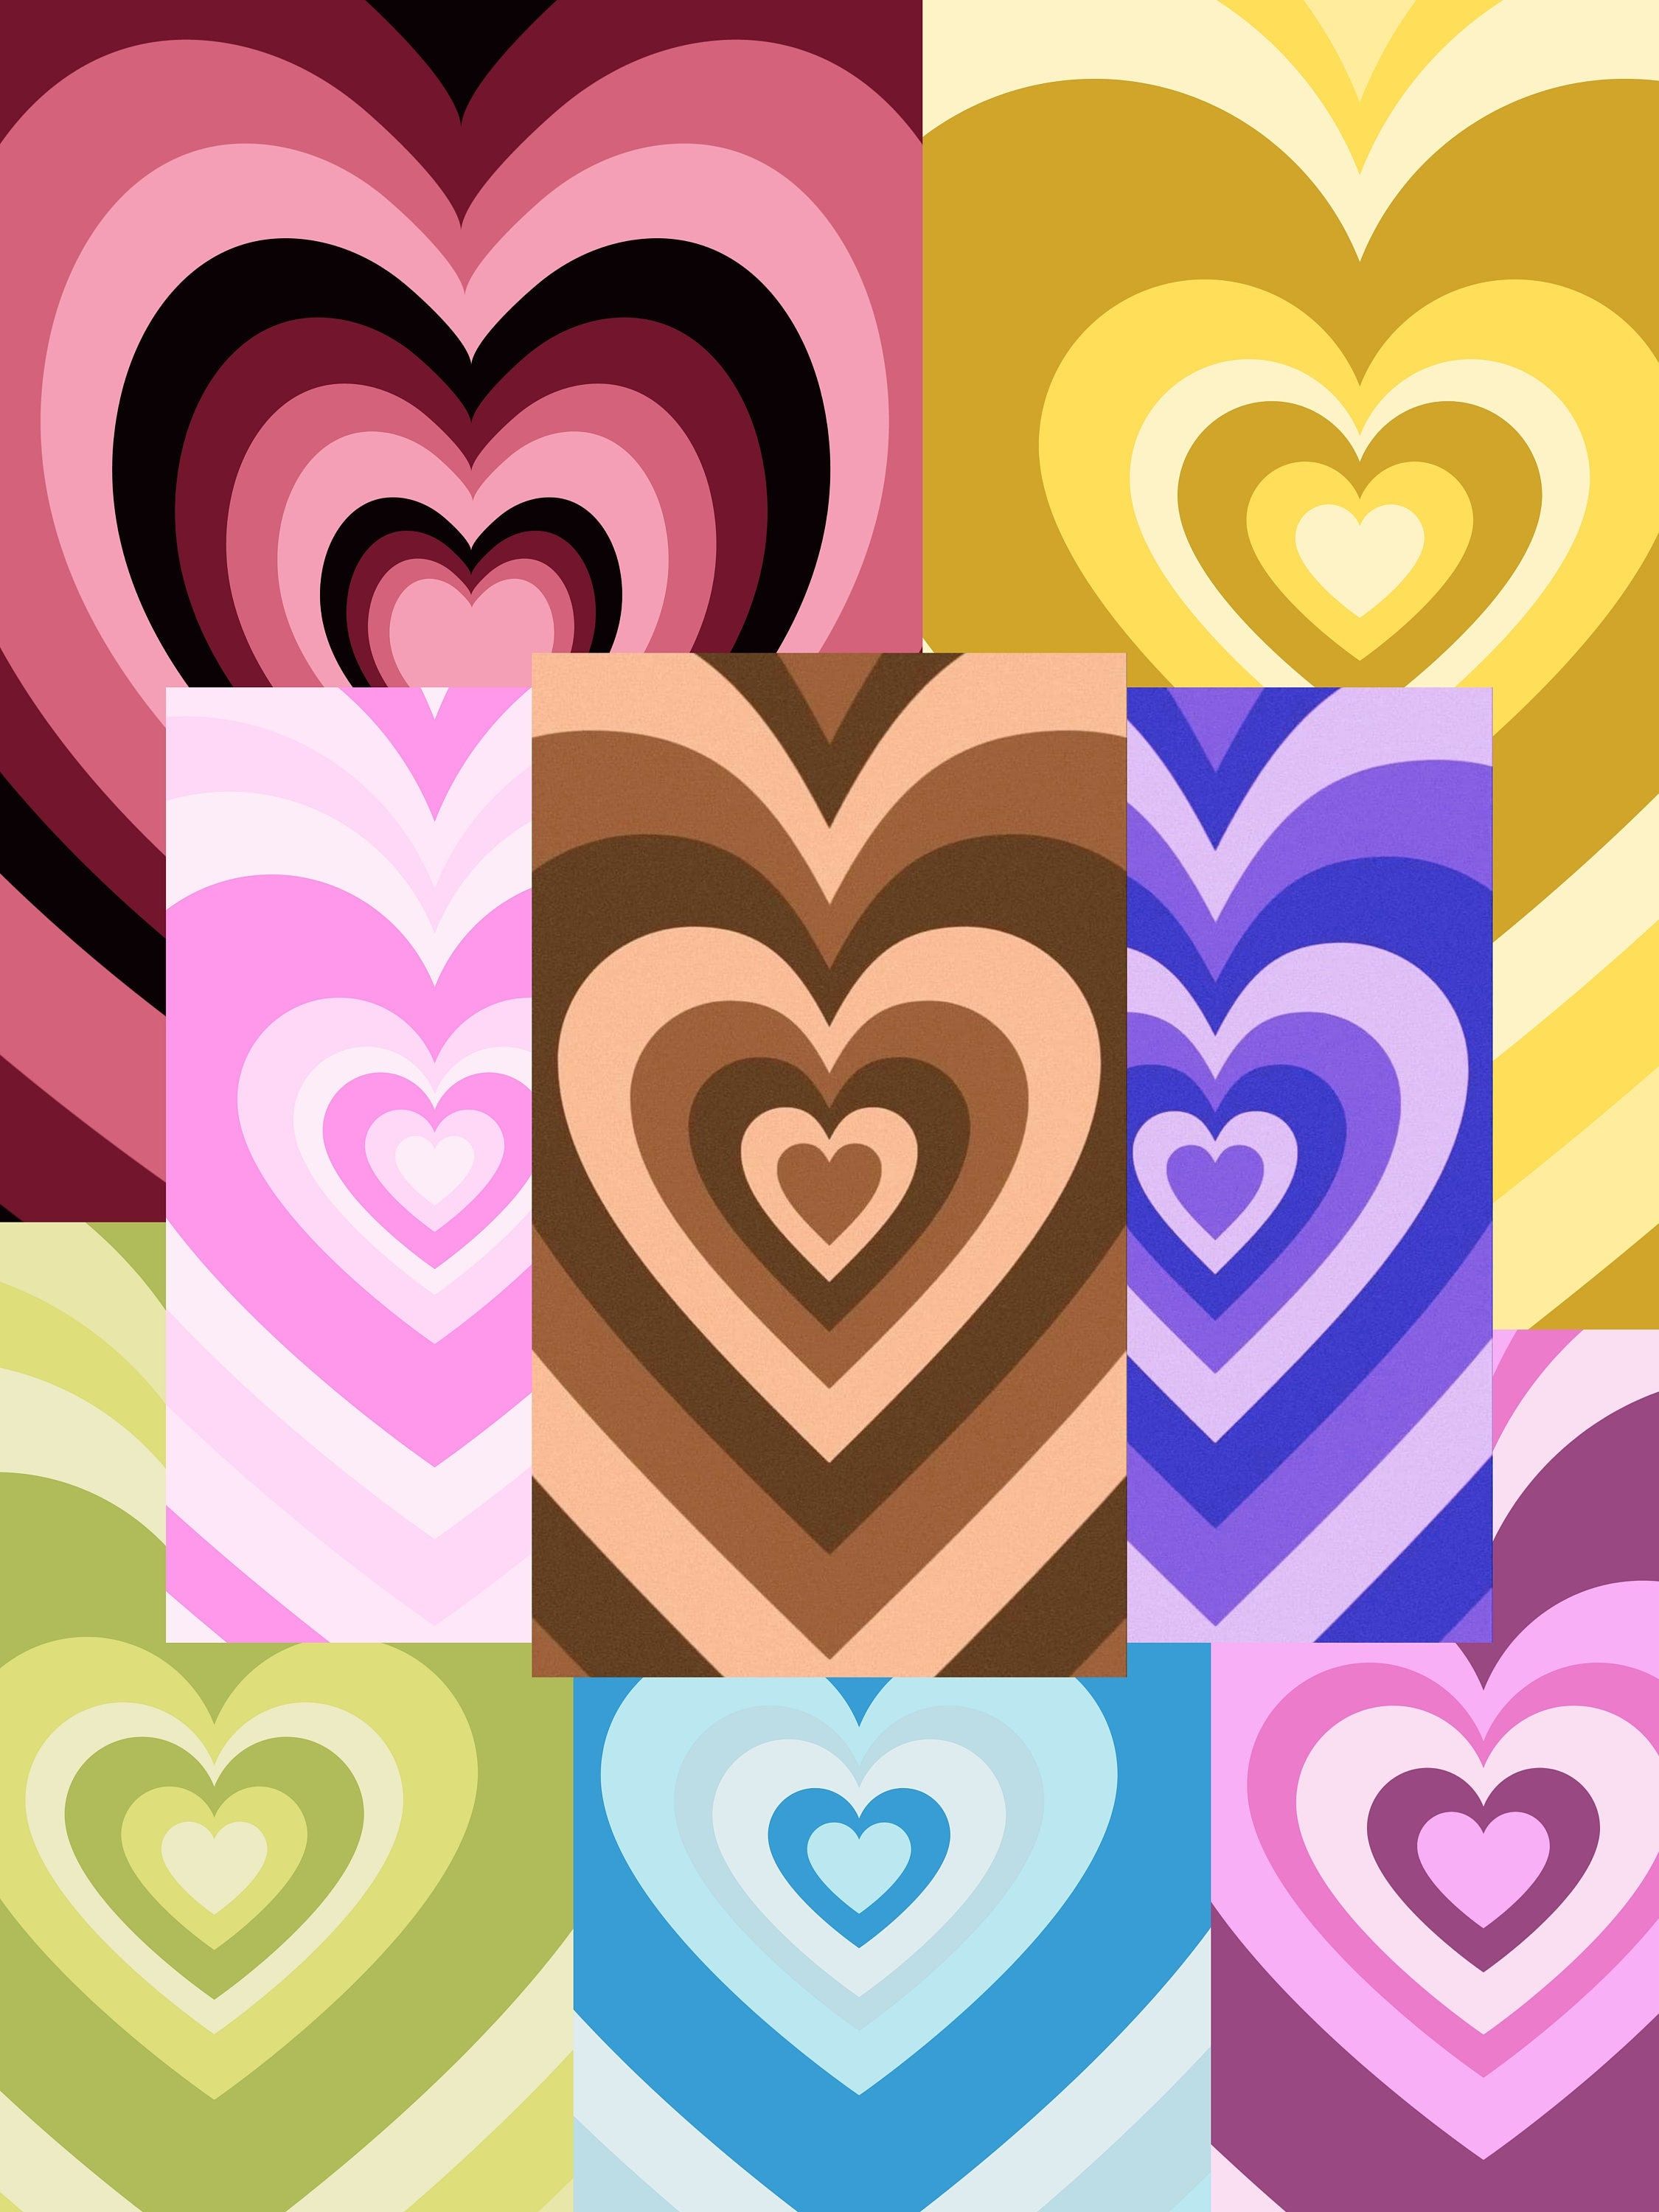 A collection of hearts in different colors - Pink heart